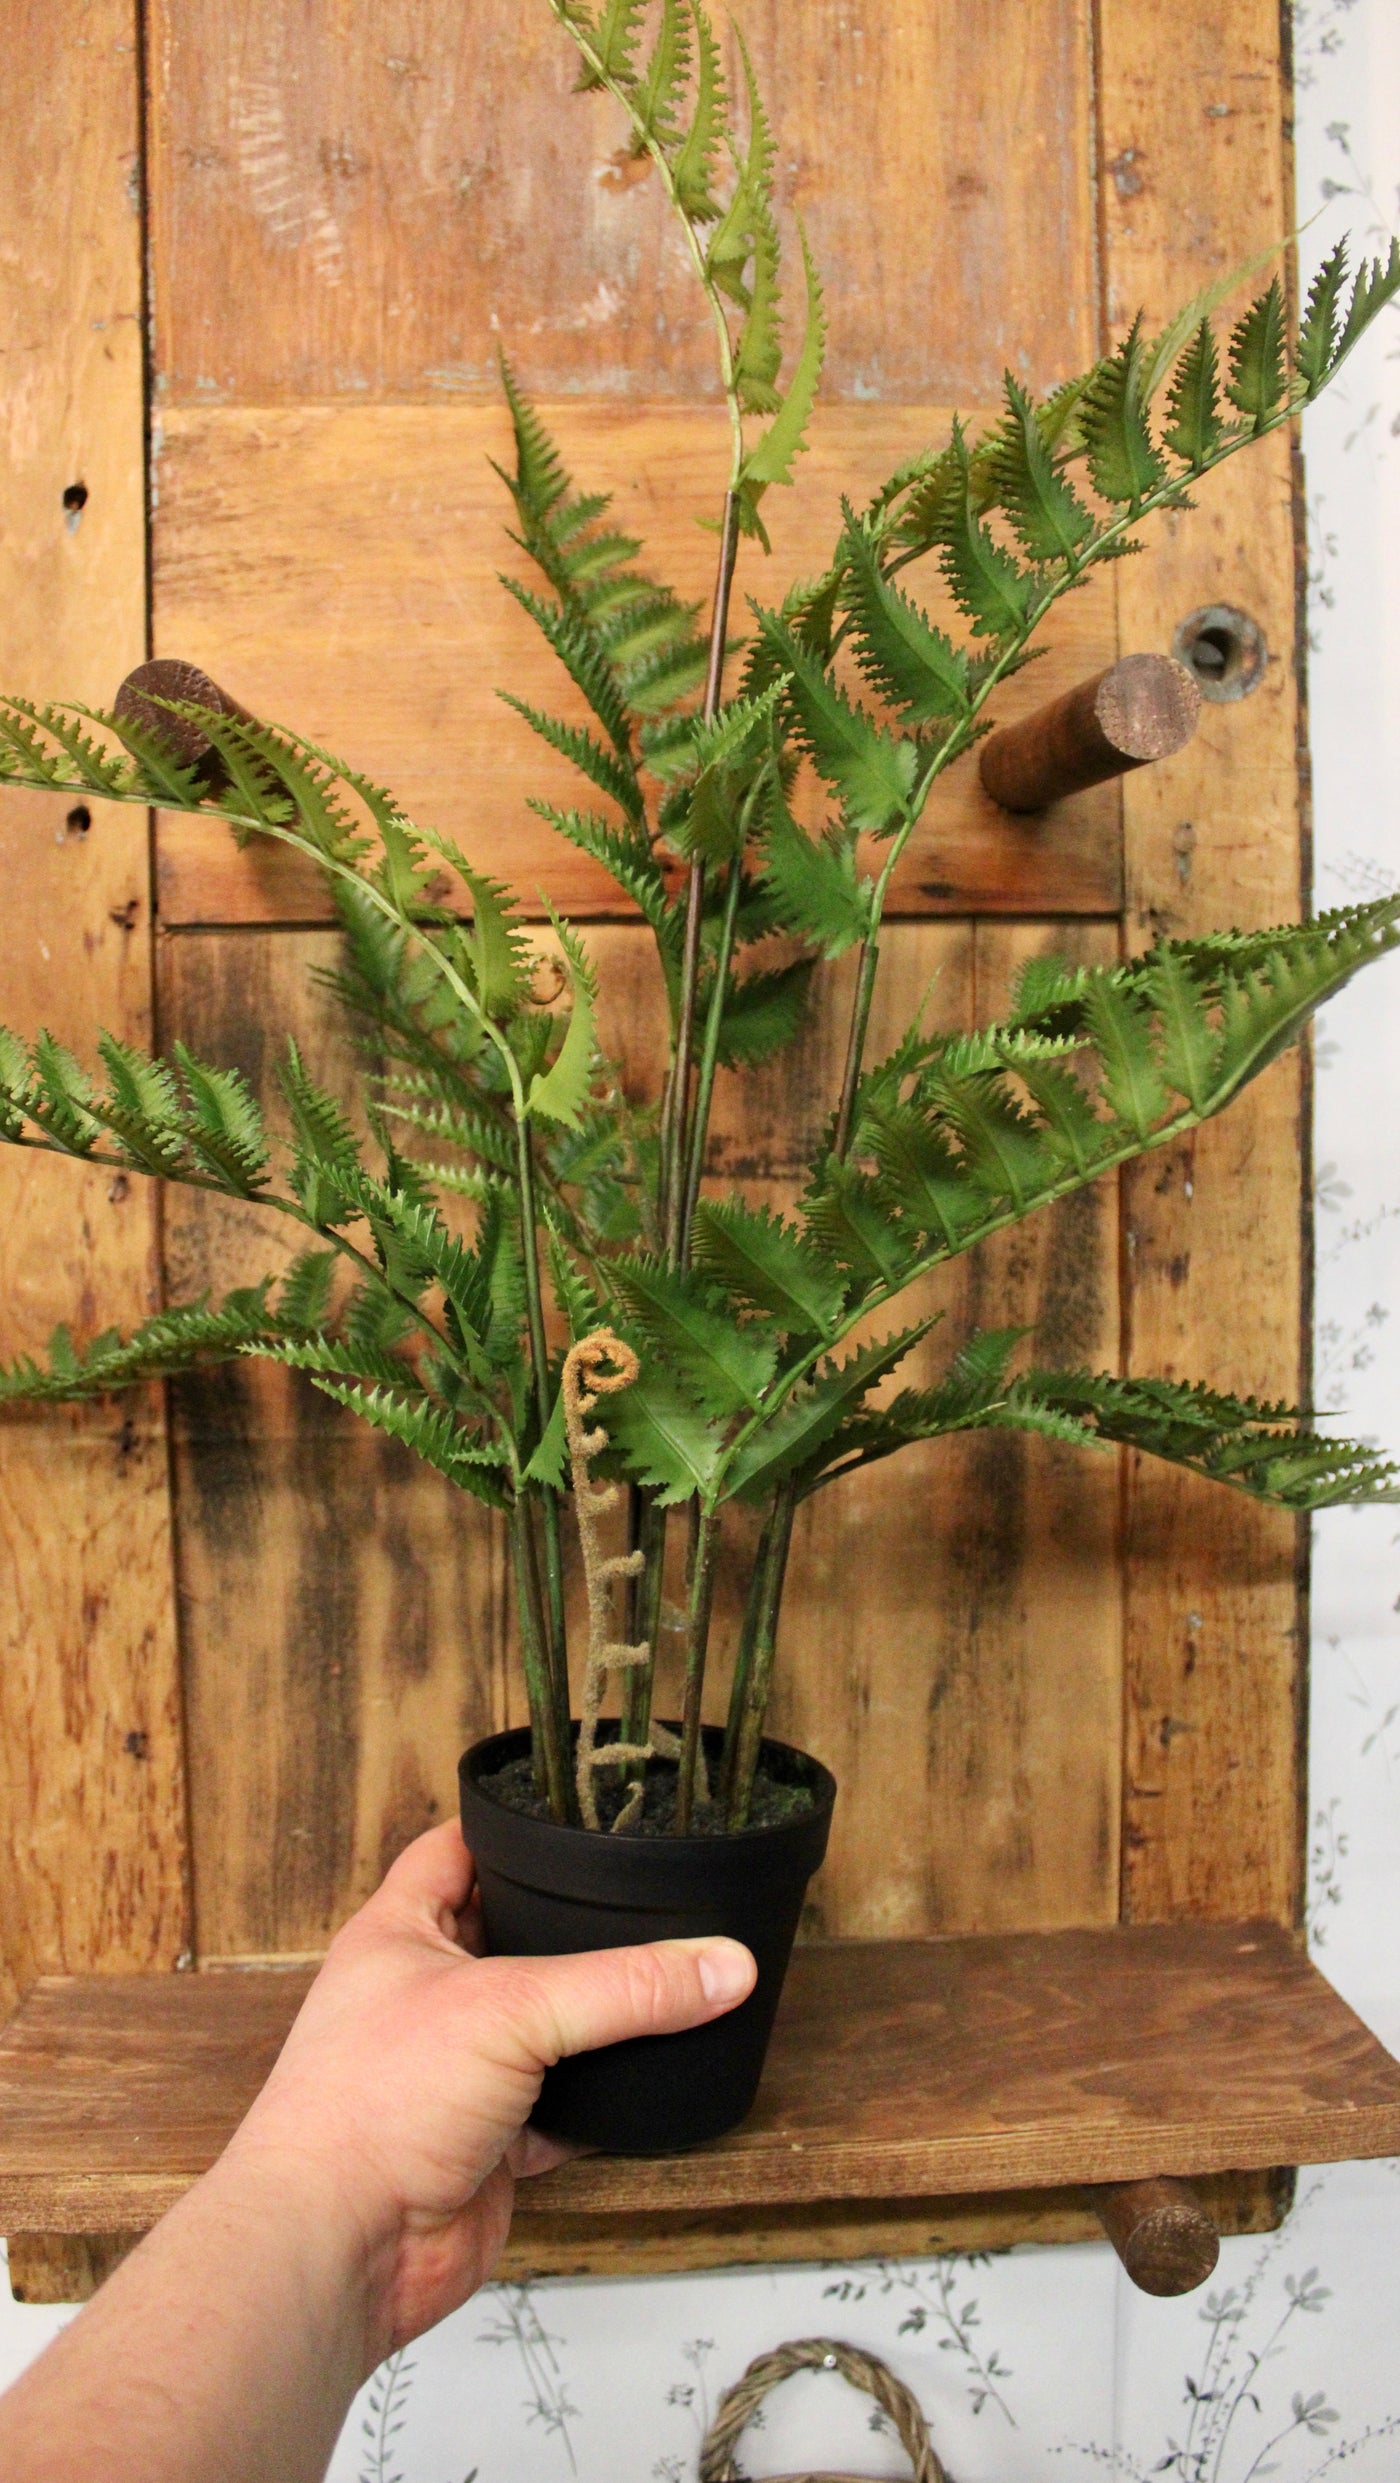 26” Potted Fern